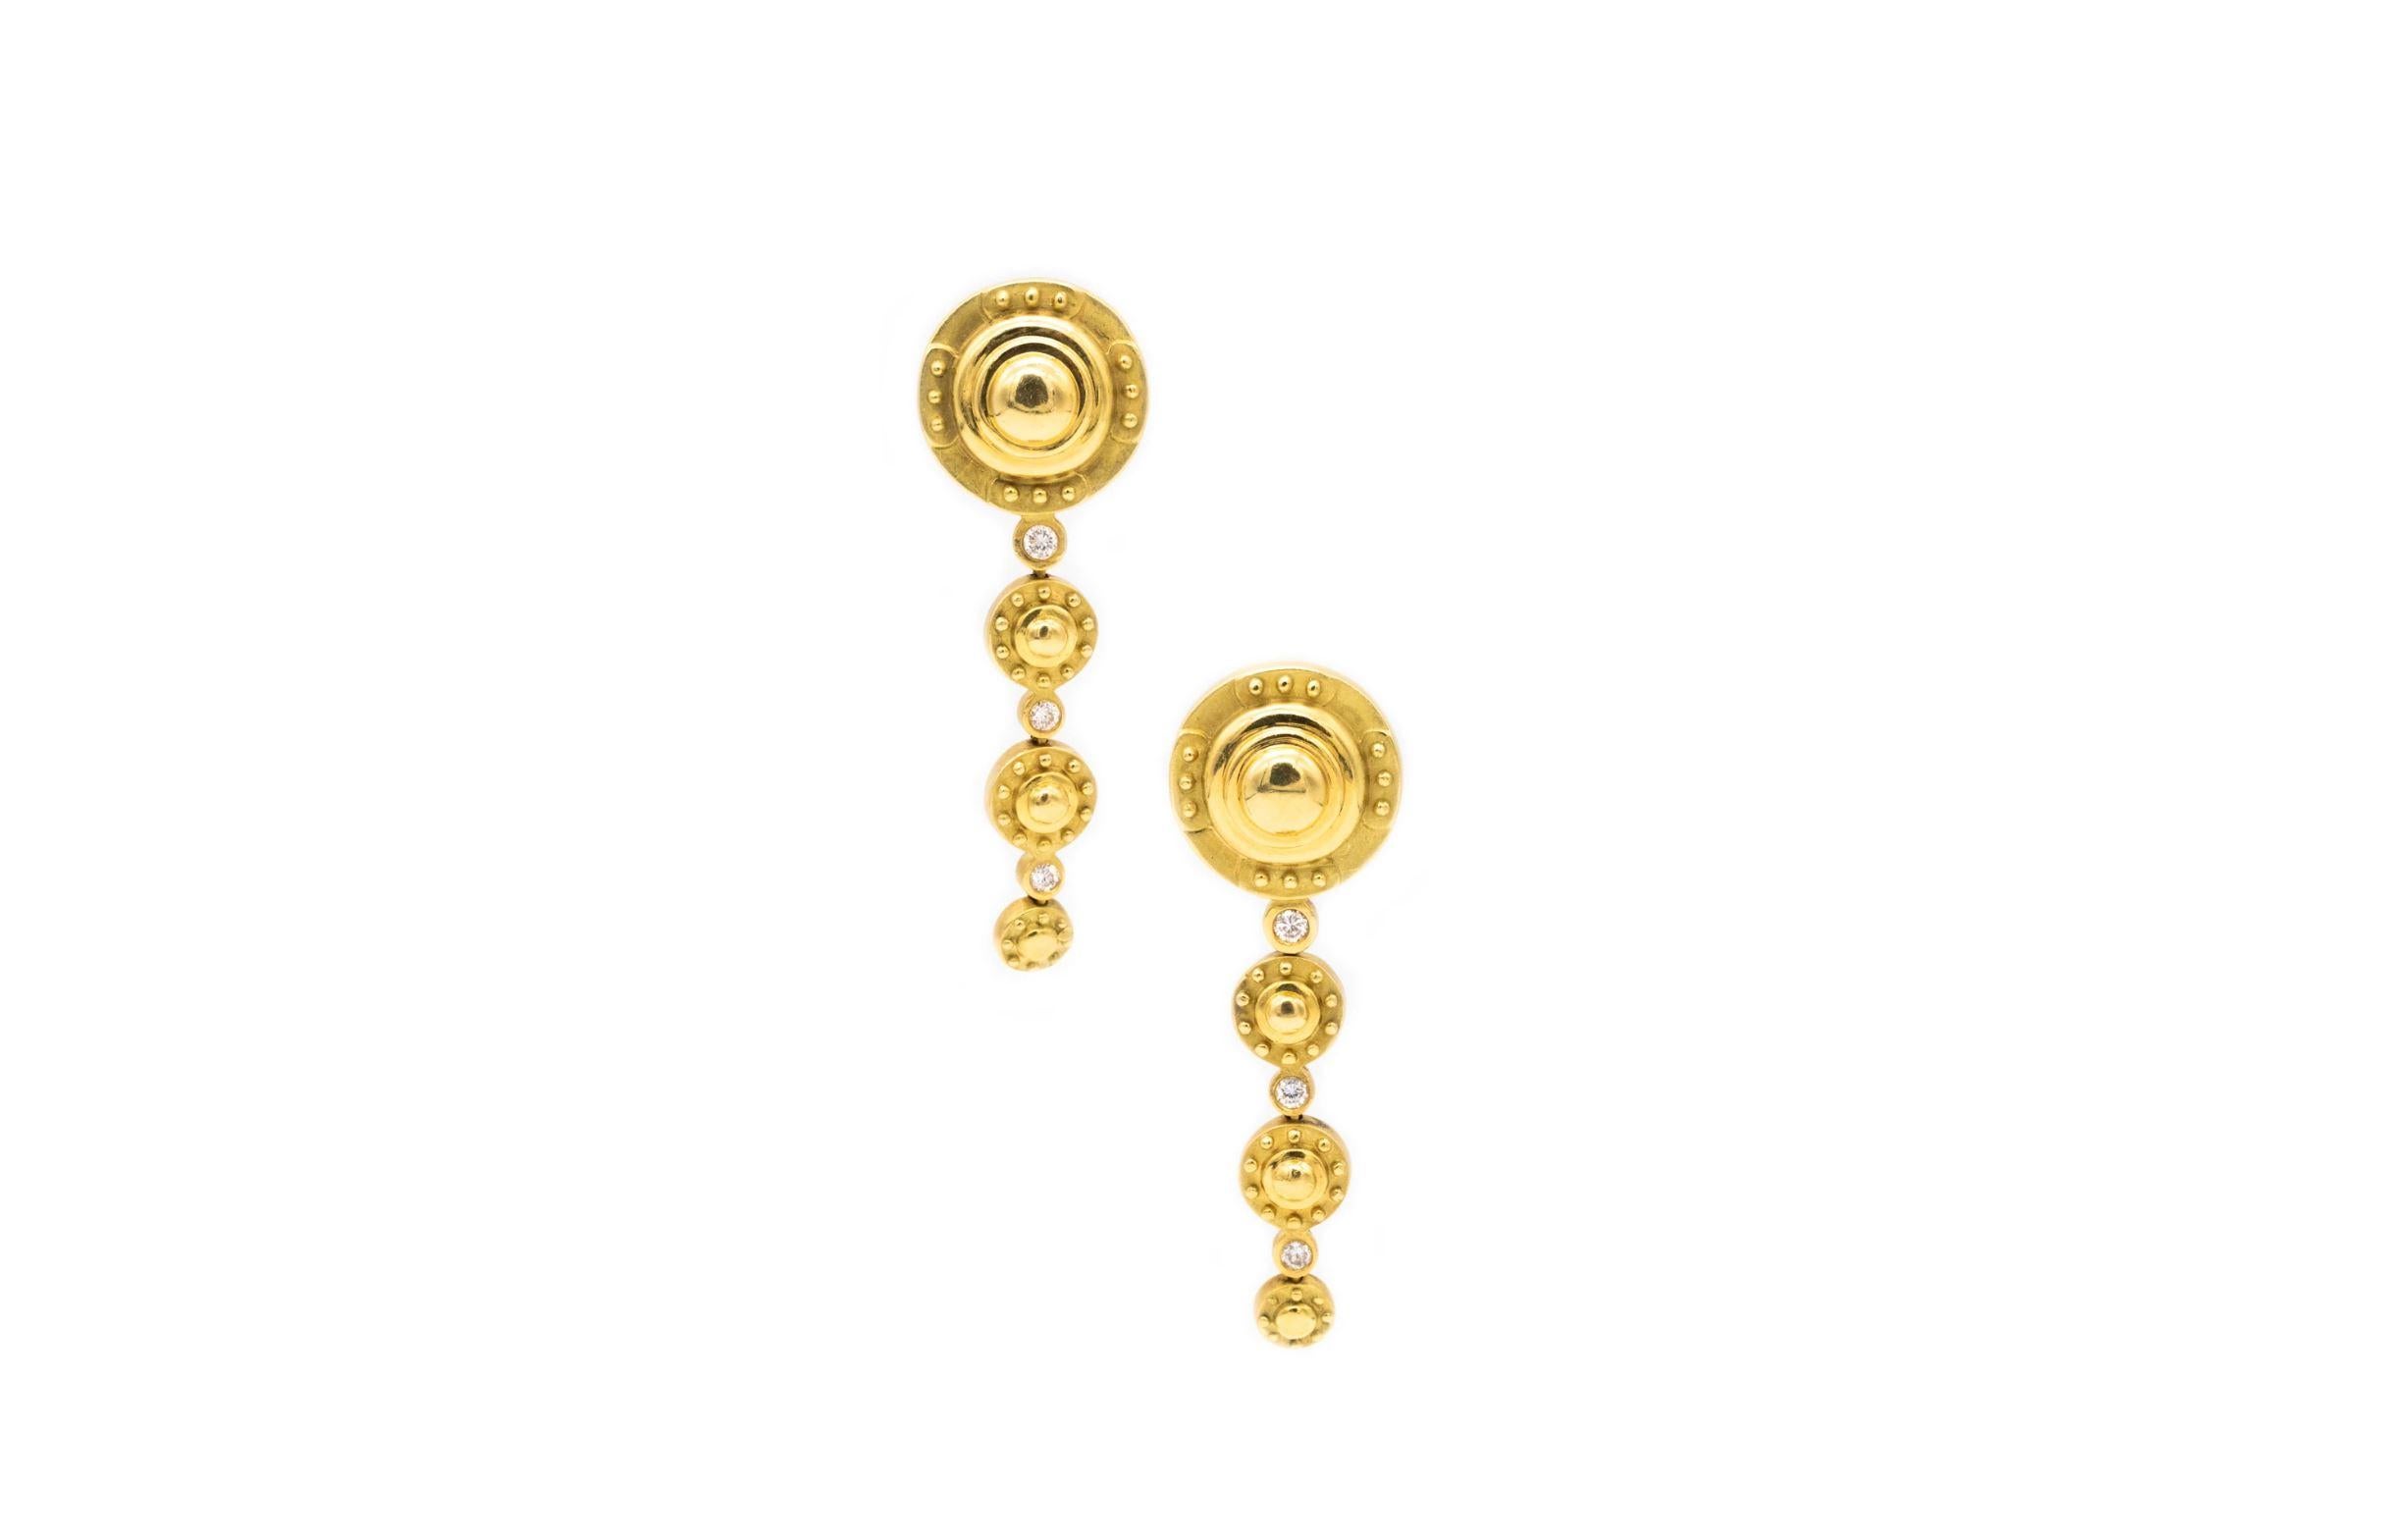 SeidenGang Etruscan Long Drop Earrings In 18Kt Yellow Gold With 6 VS Diamonds For Sale 1